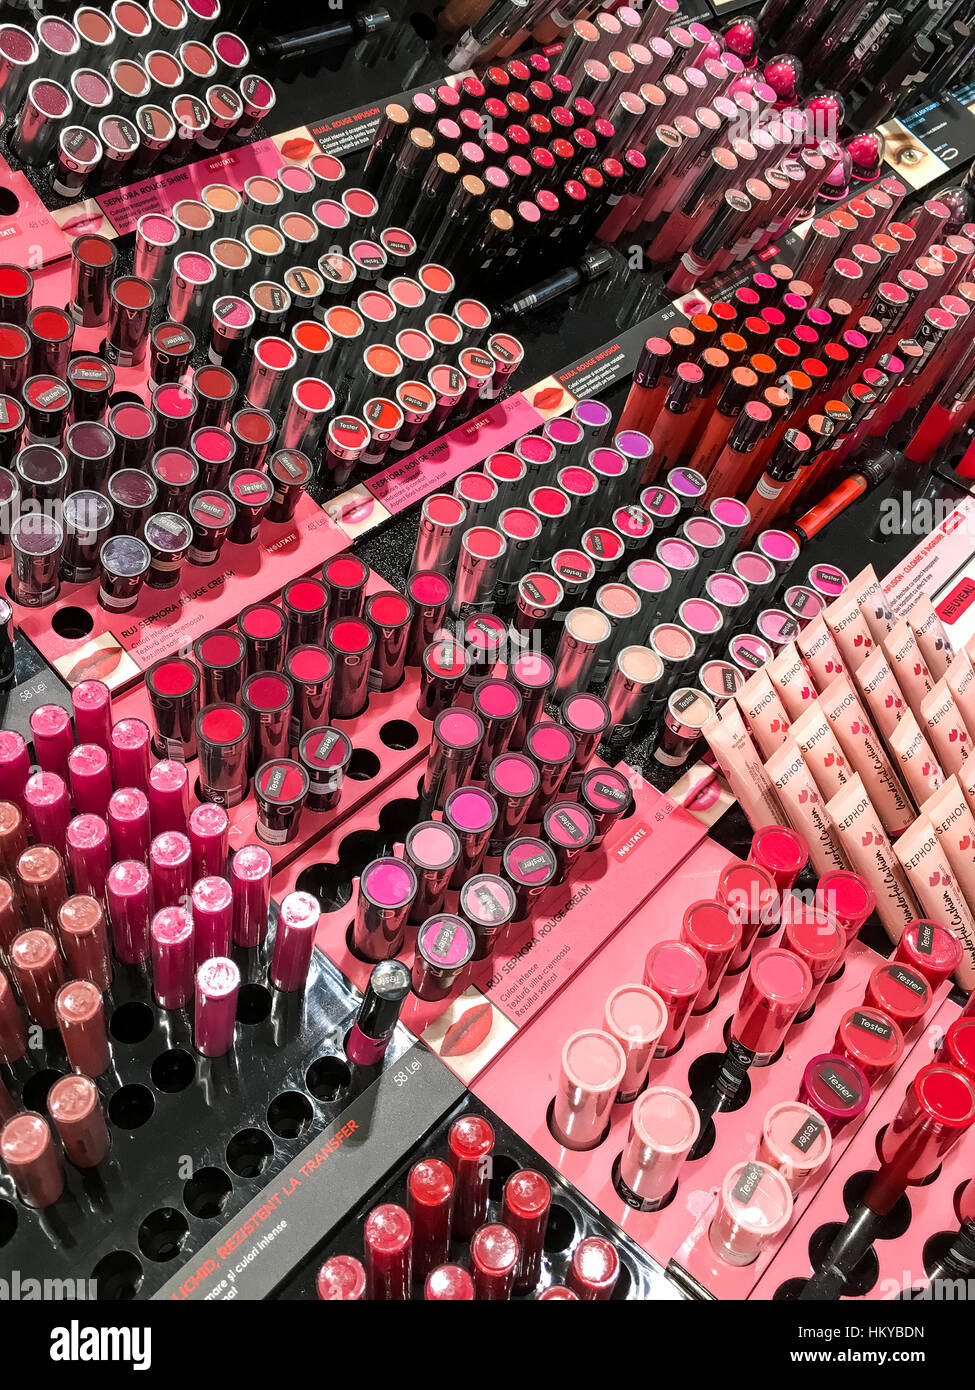 BUCHAREST, ROMANIA - MAY 30, 2016: Cosmetic Products For Sale In Fashion Beauty Shop Display. Stock Photo